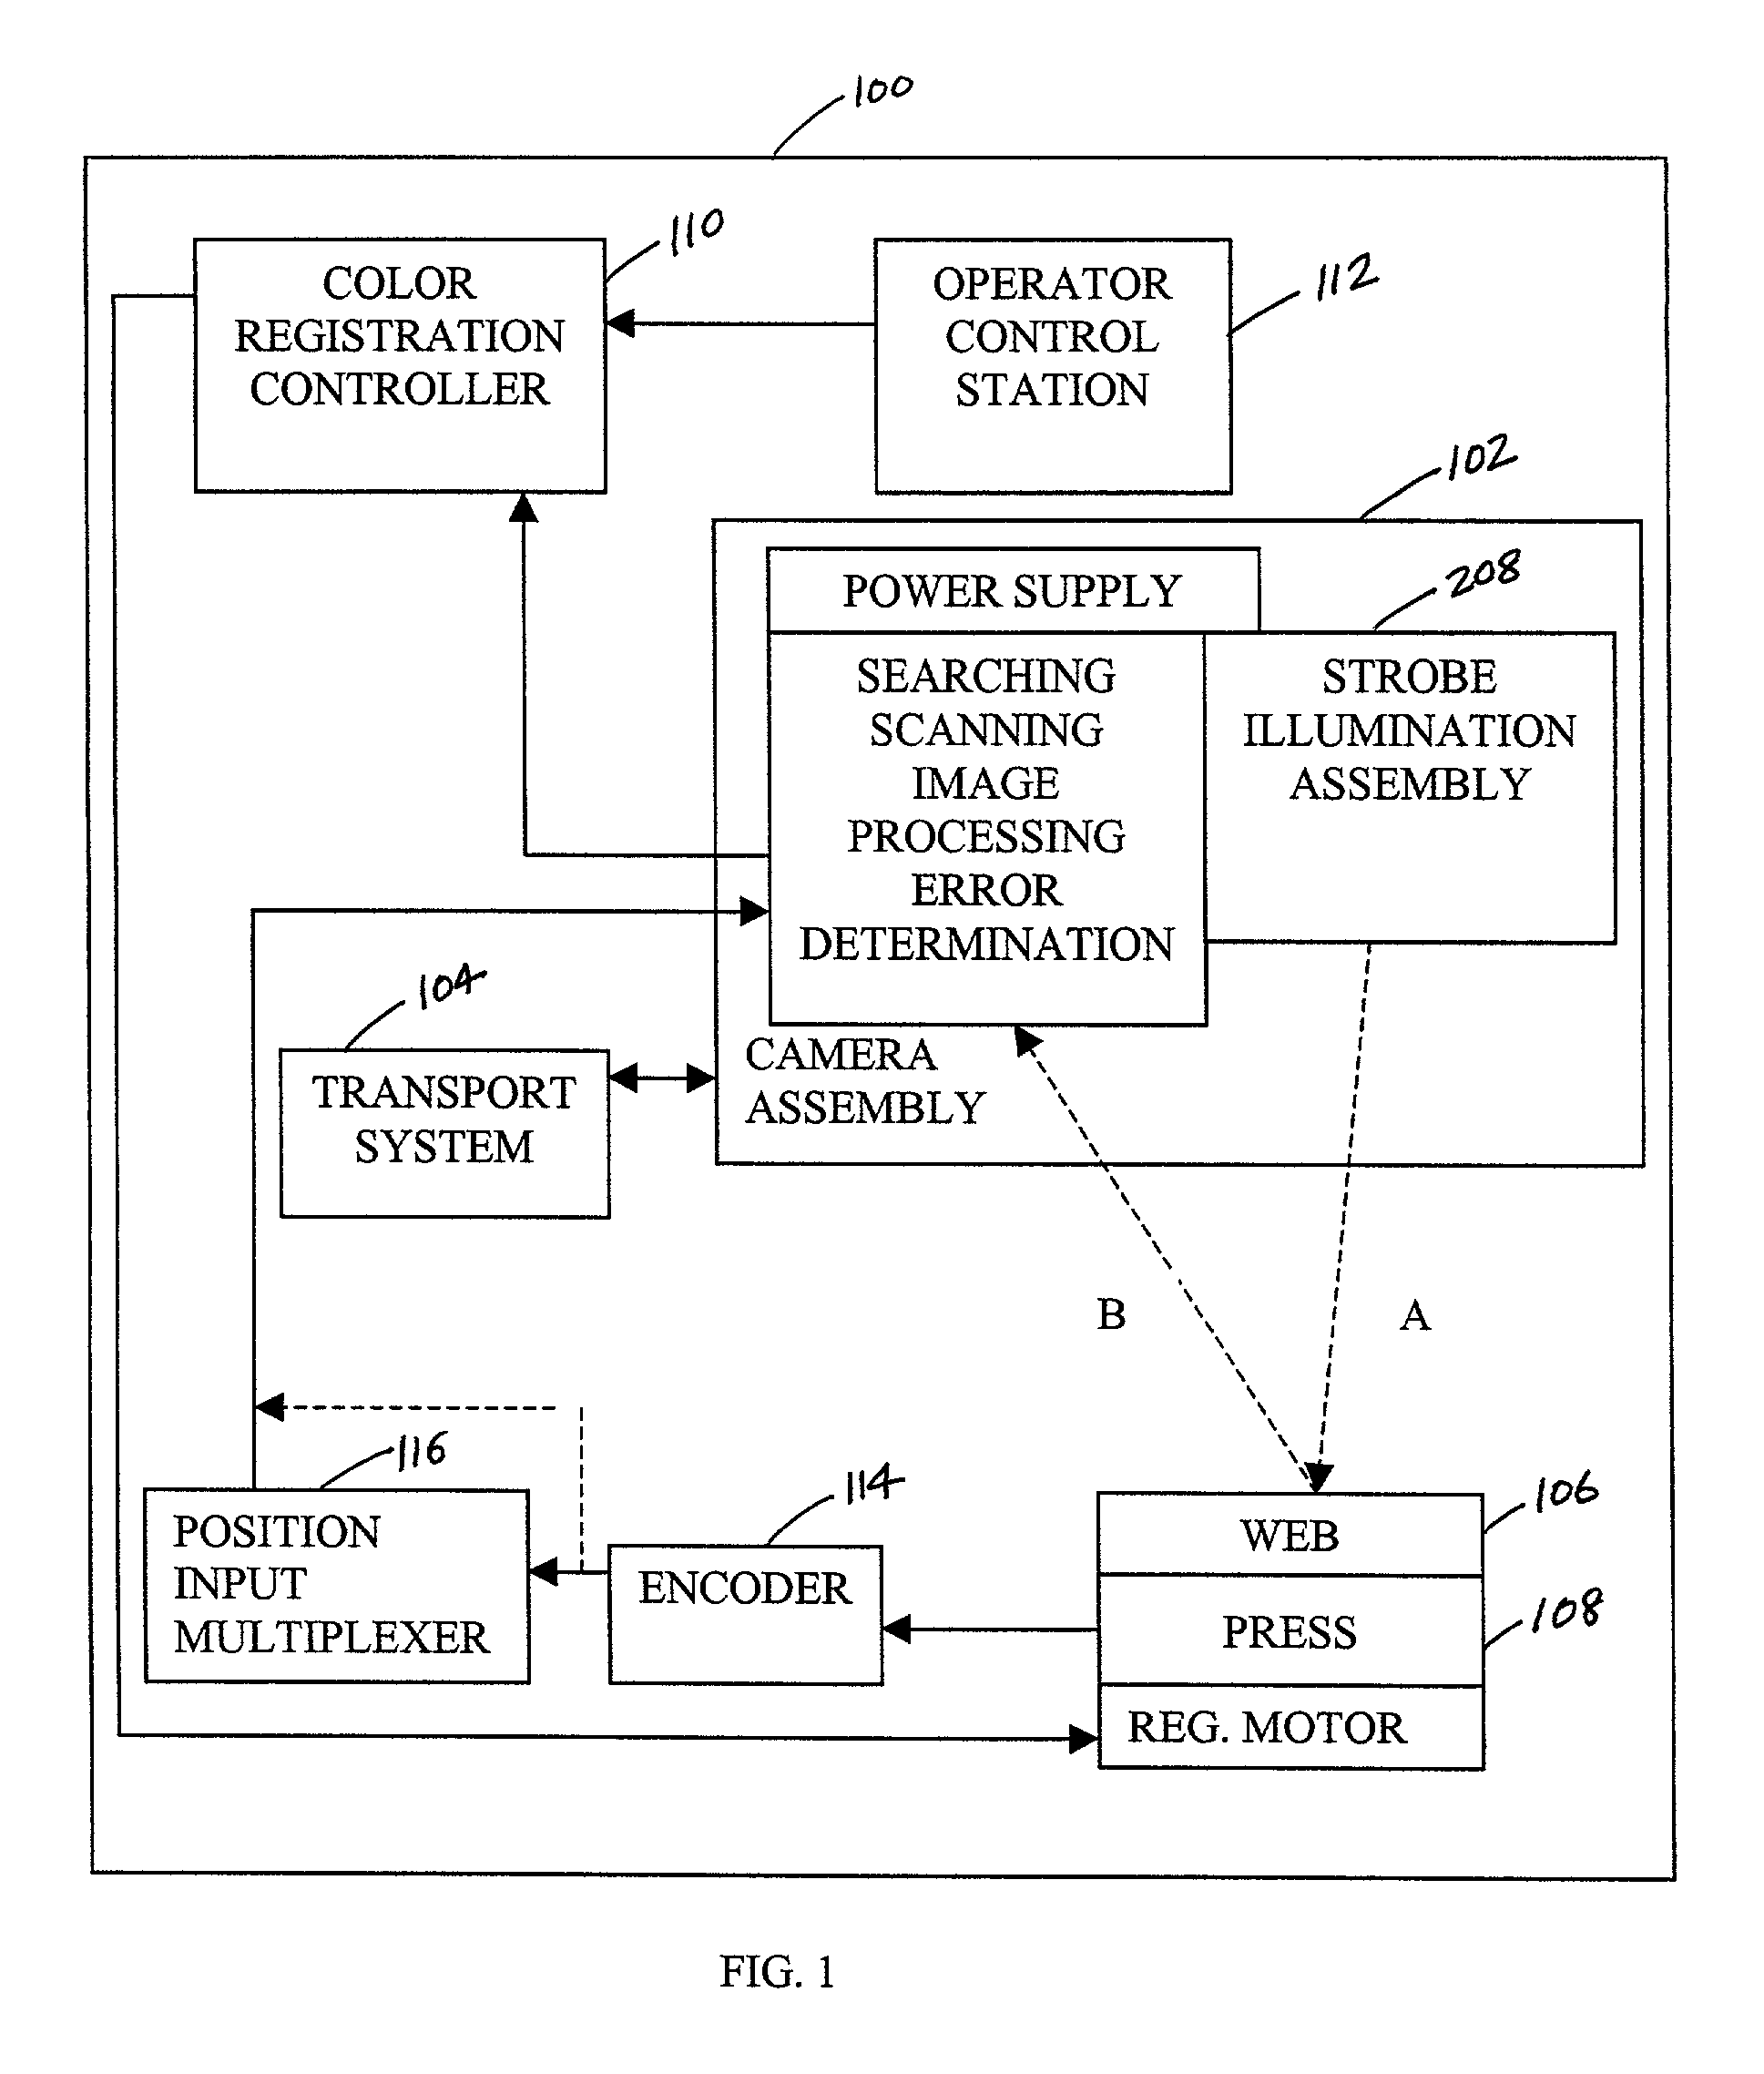 Color registration control system for a printing press